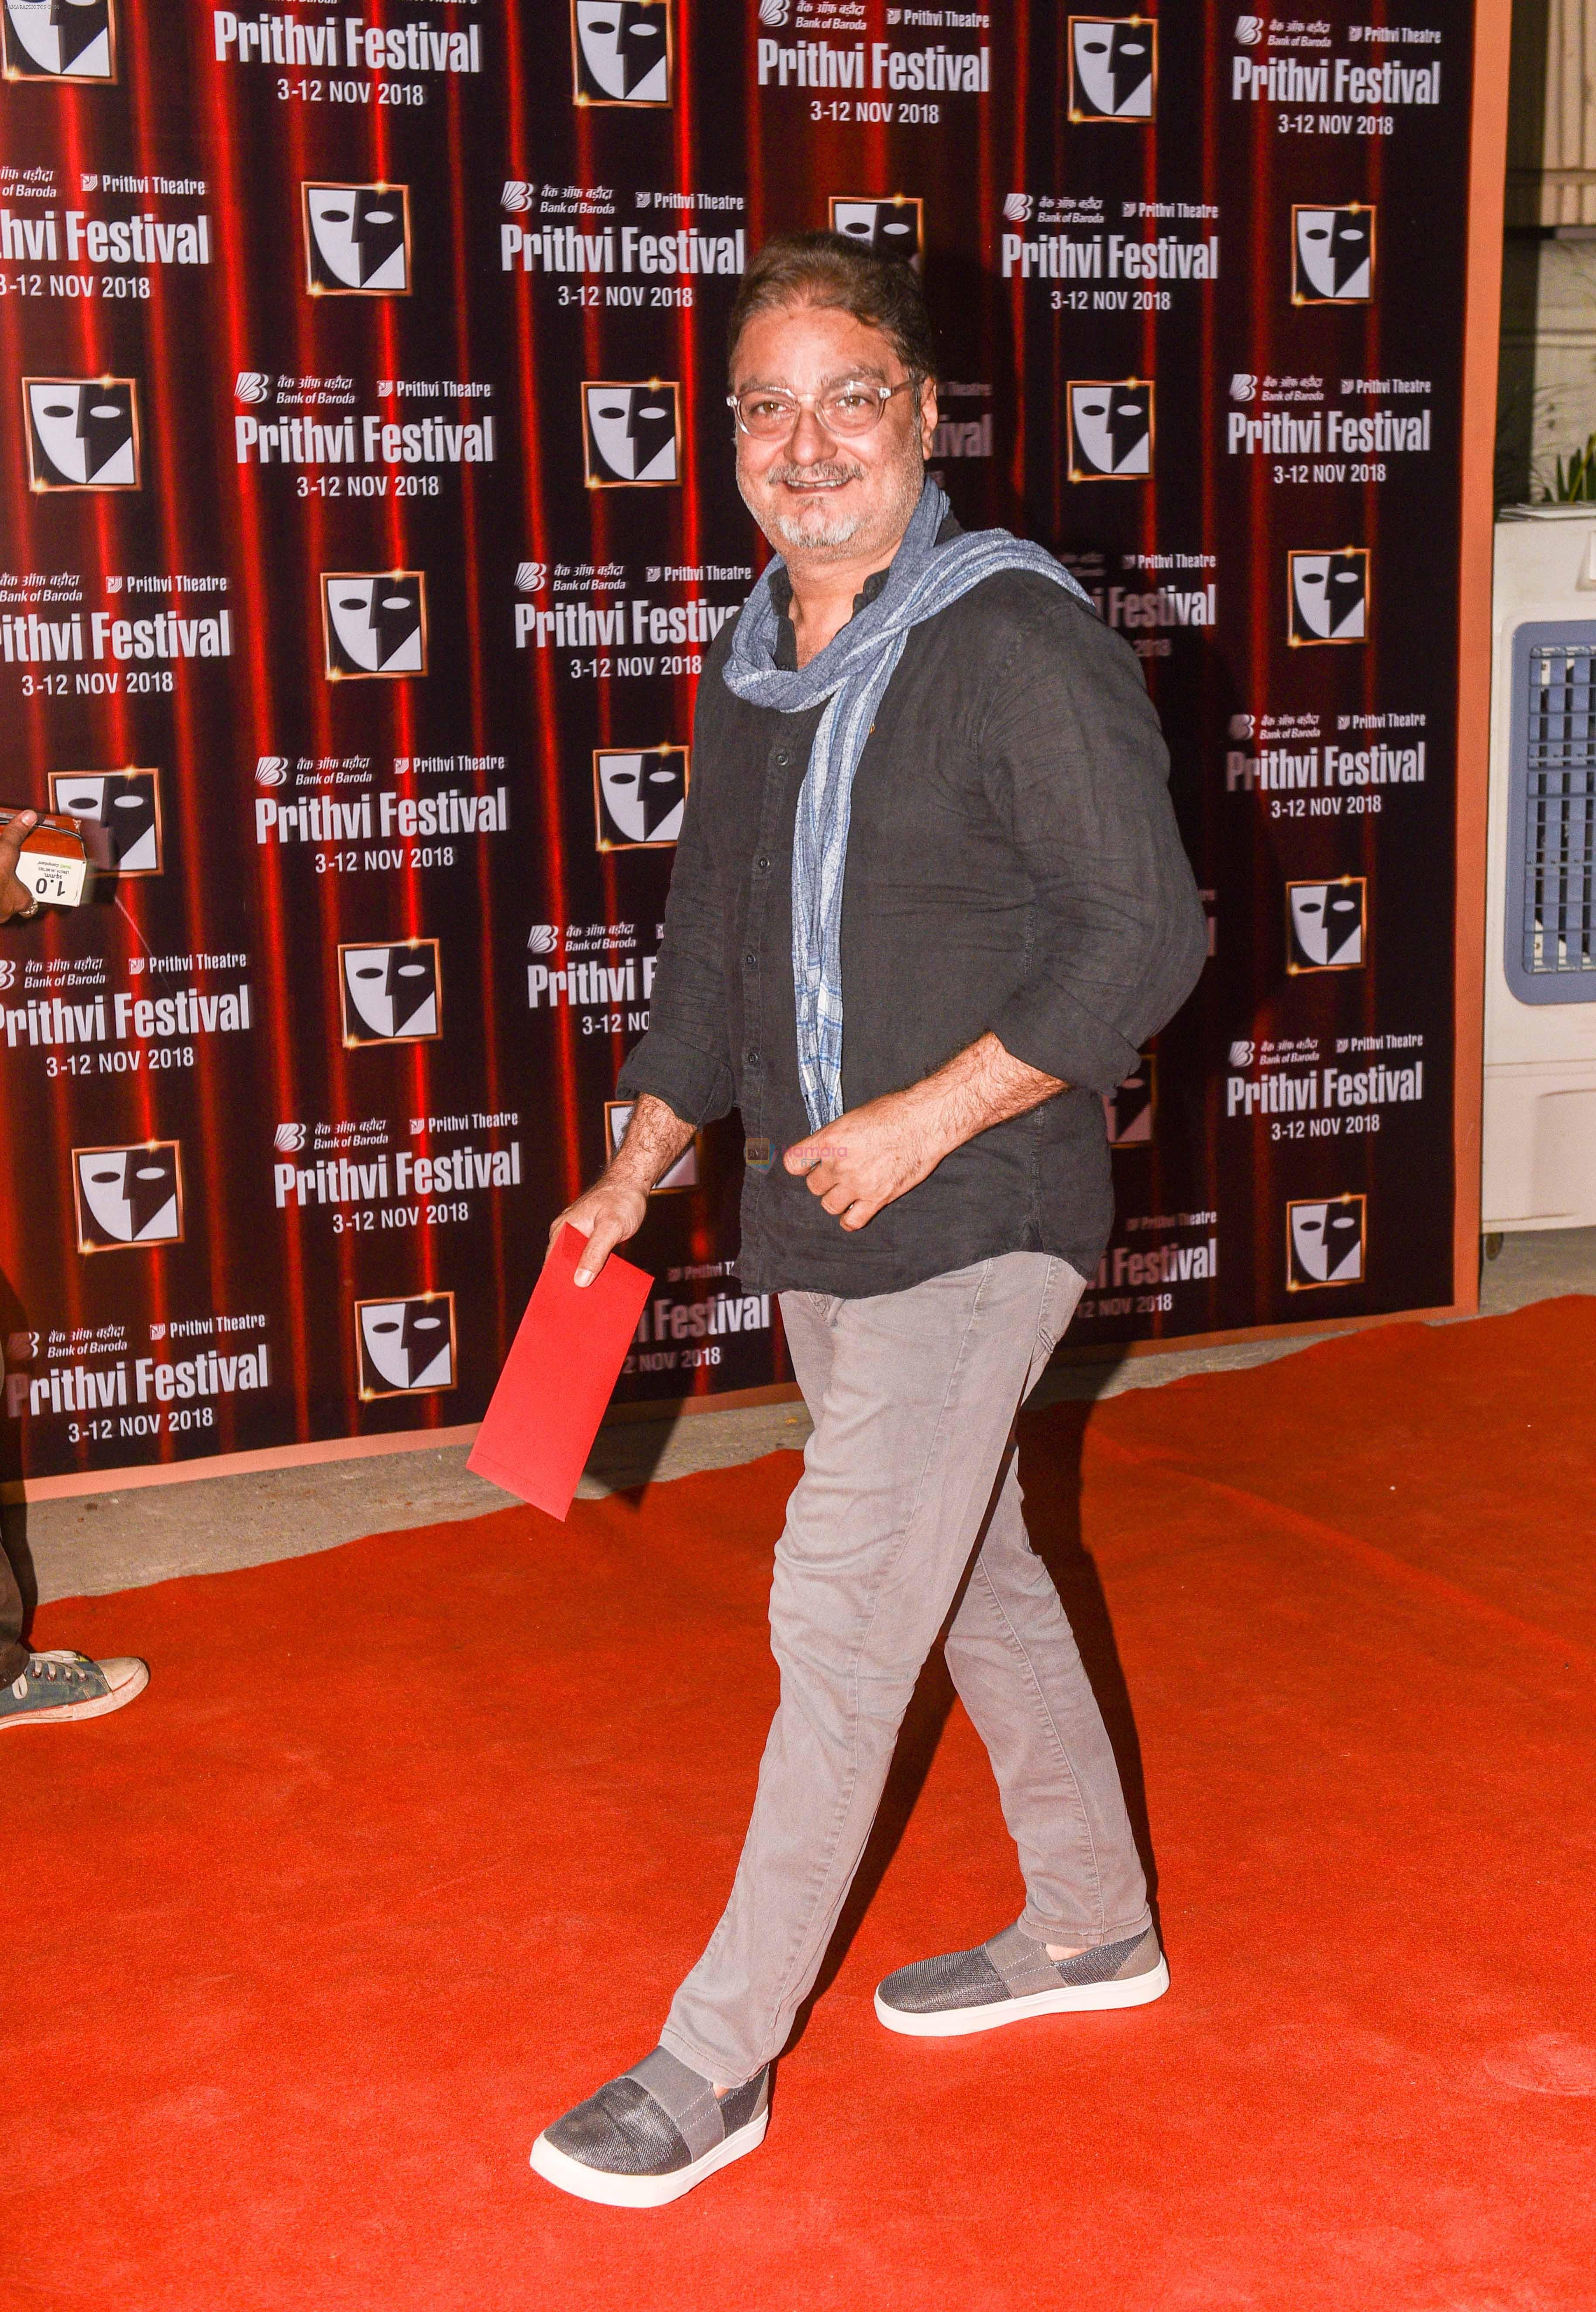 Vinay Pathak at the inauguration of Mumbai_ iconic Prithivi theatre festival on 4th Nov 2018